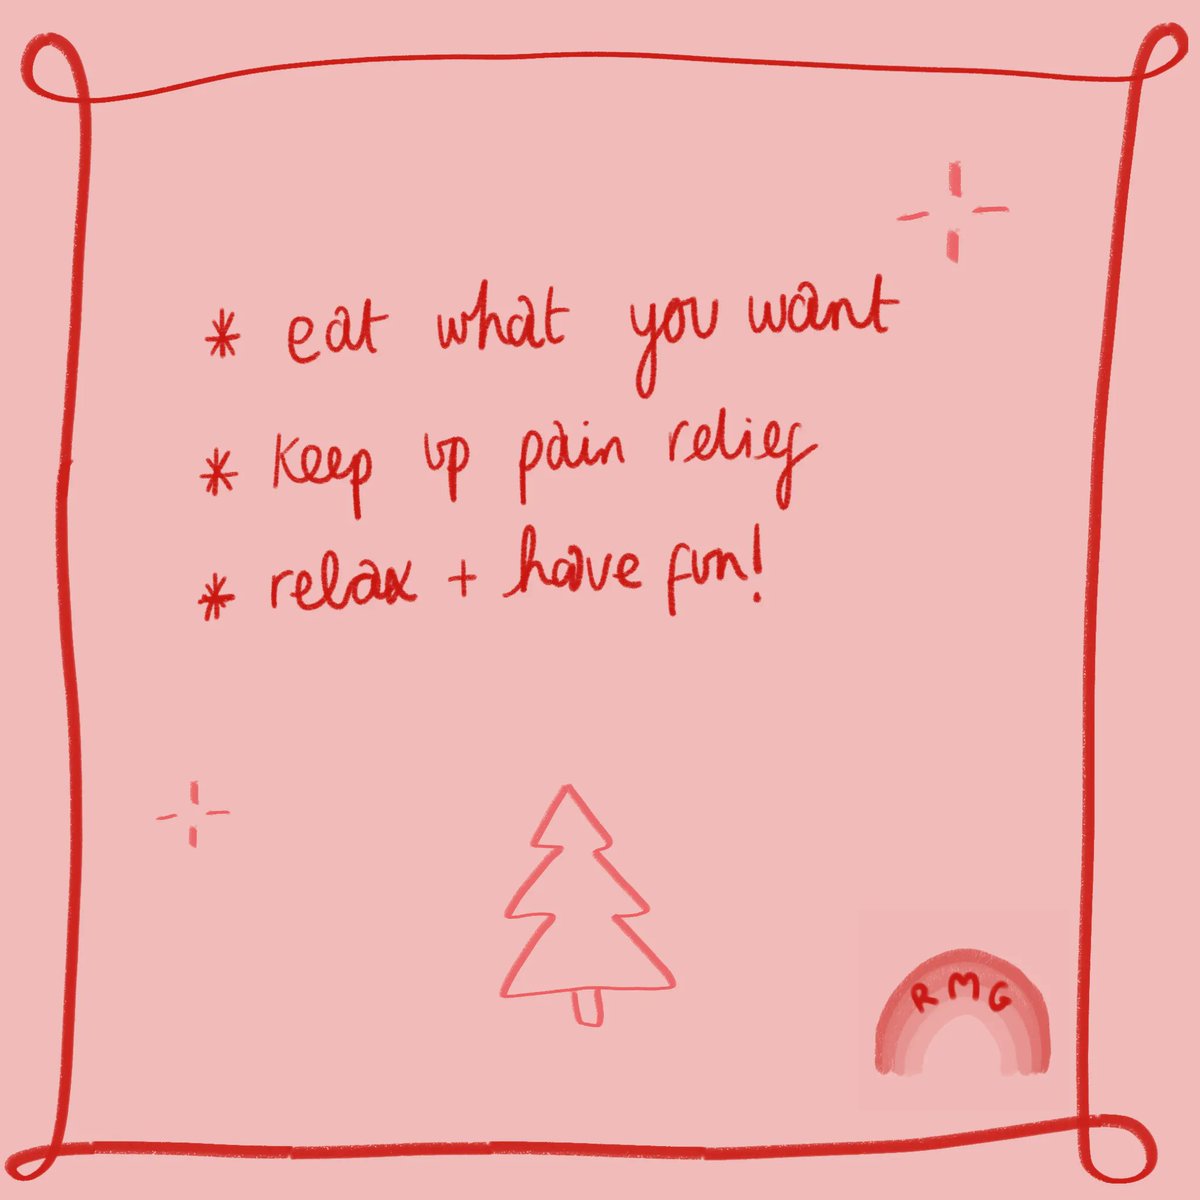 Shout out to those menstruating over Christmas 🎄🩸 Oddly enough, I've spent a lot of Christmases on my period. Last year, I was on the sofa with under an electric blanket, napping, eating and just enjoying some time out. Tis the season to rest, make the most of it!